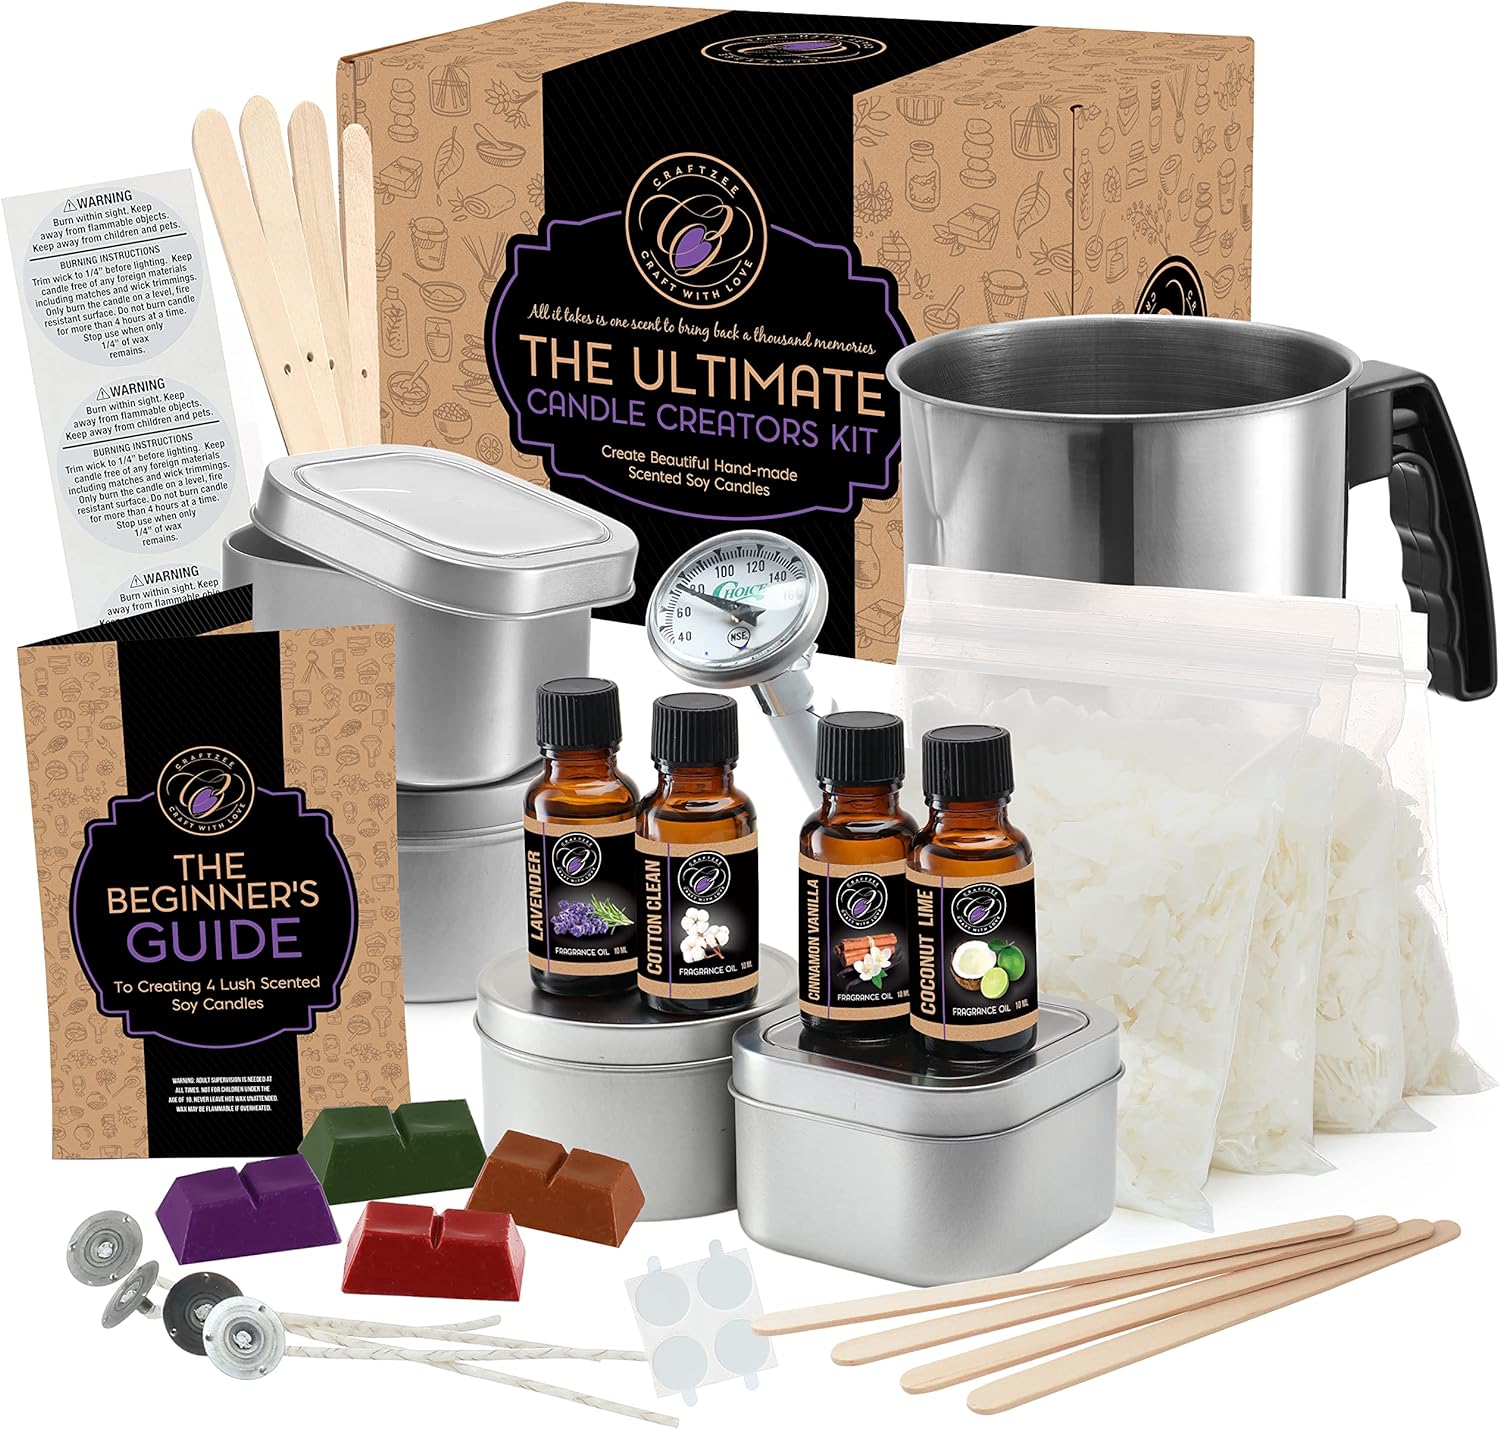 Complete DIY Candle Making Kit – CraftZee Brand